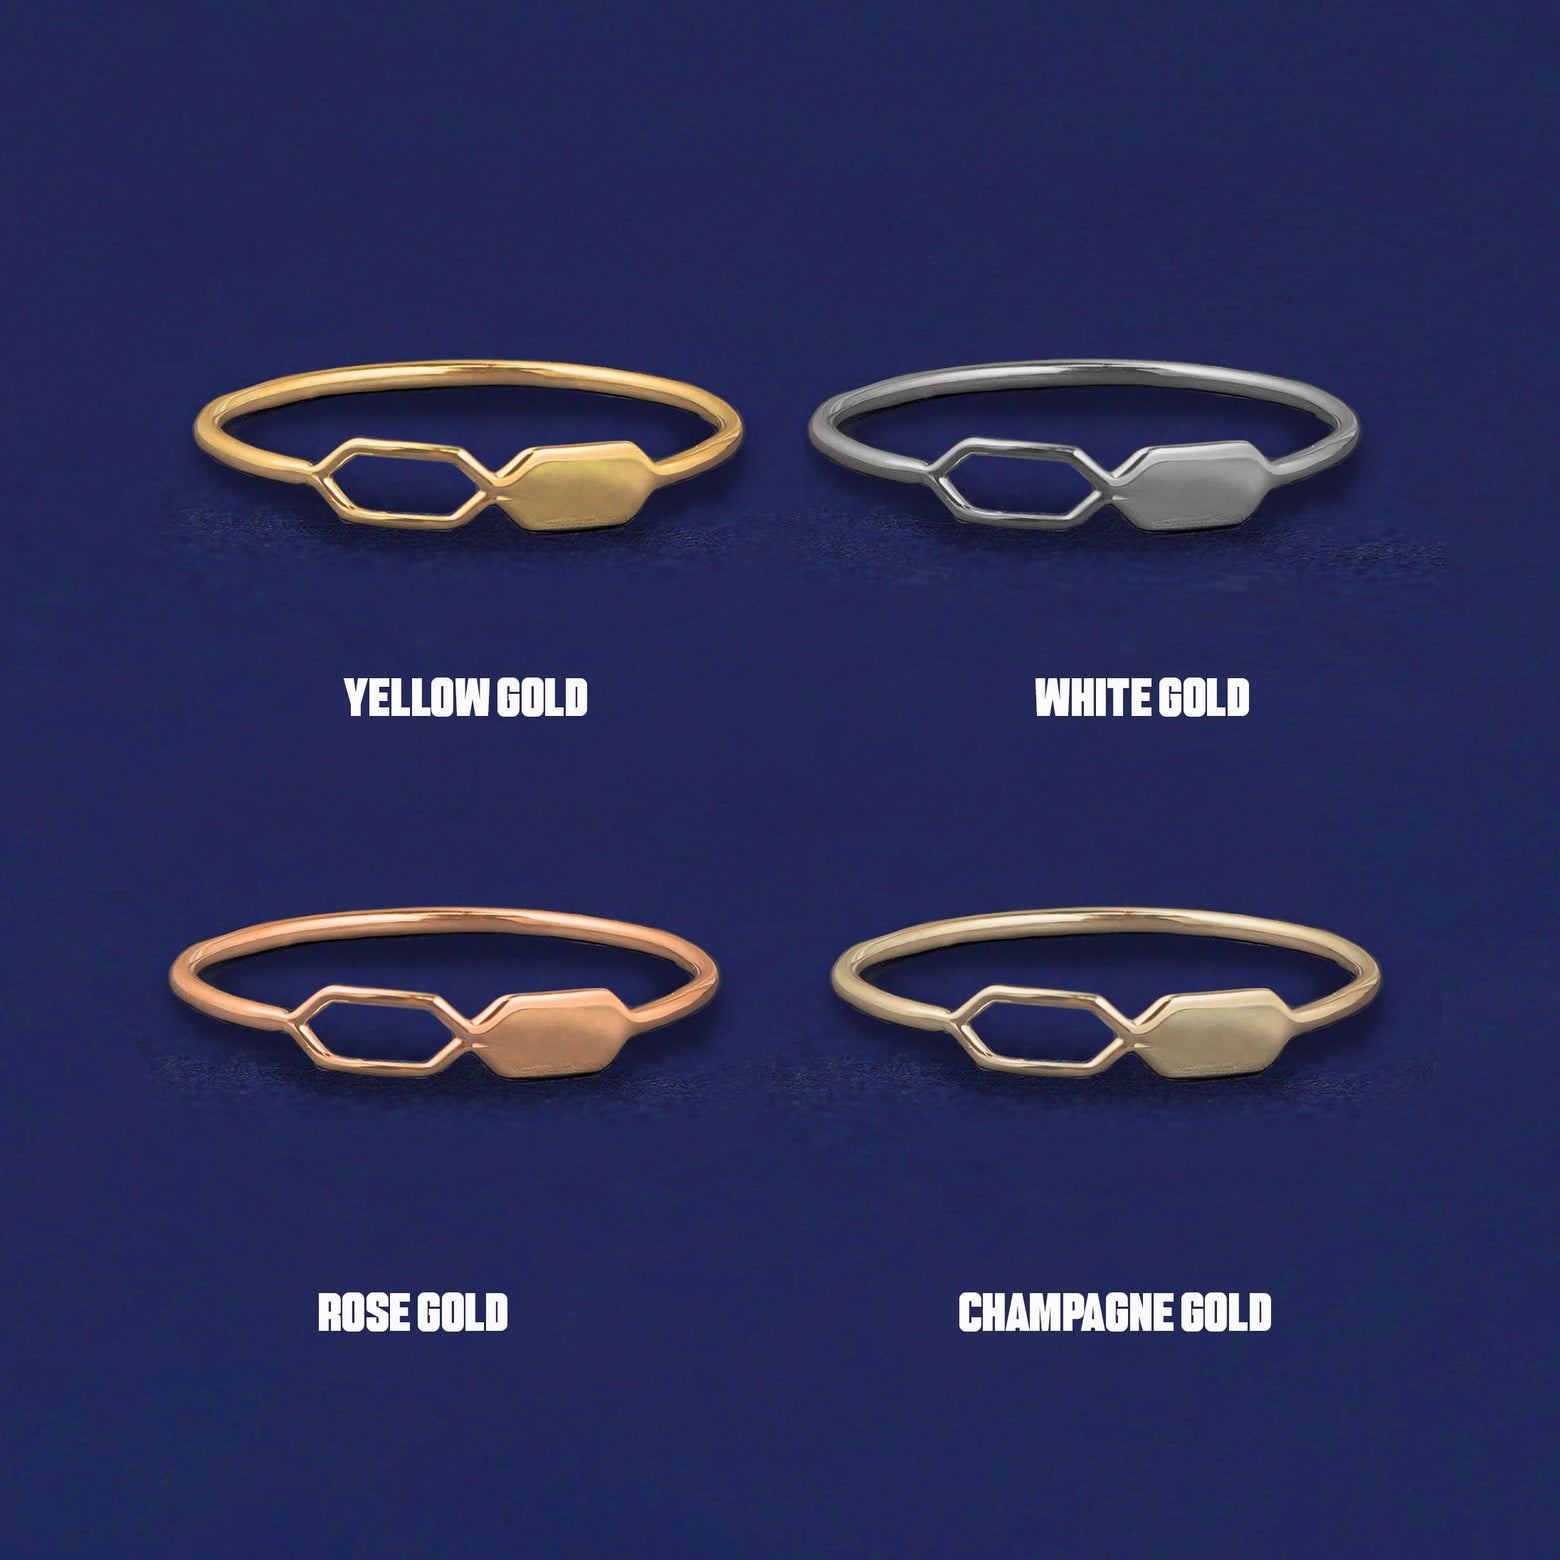 Four versions of the Tanlah Ring shown in options of yellow, white, rose and champagne gold